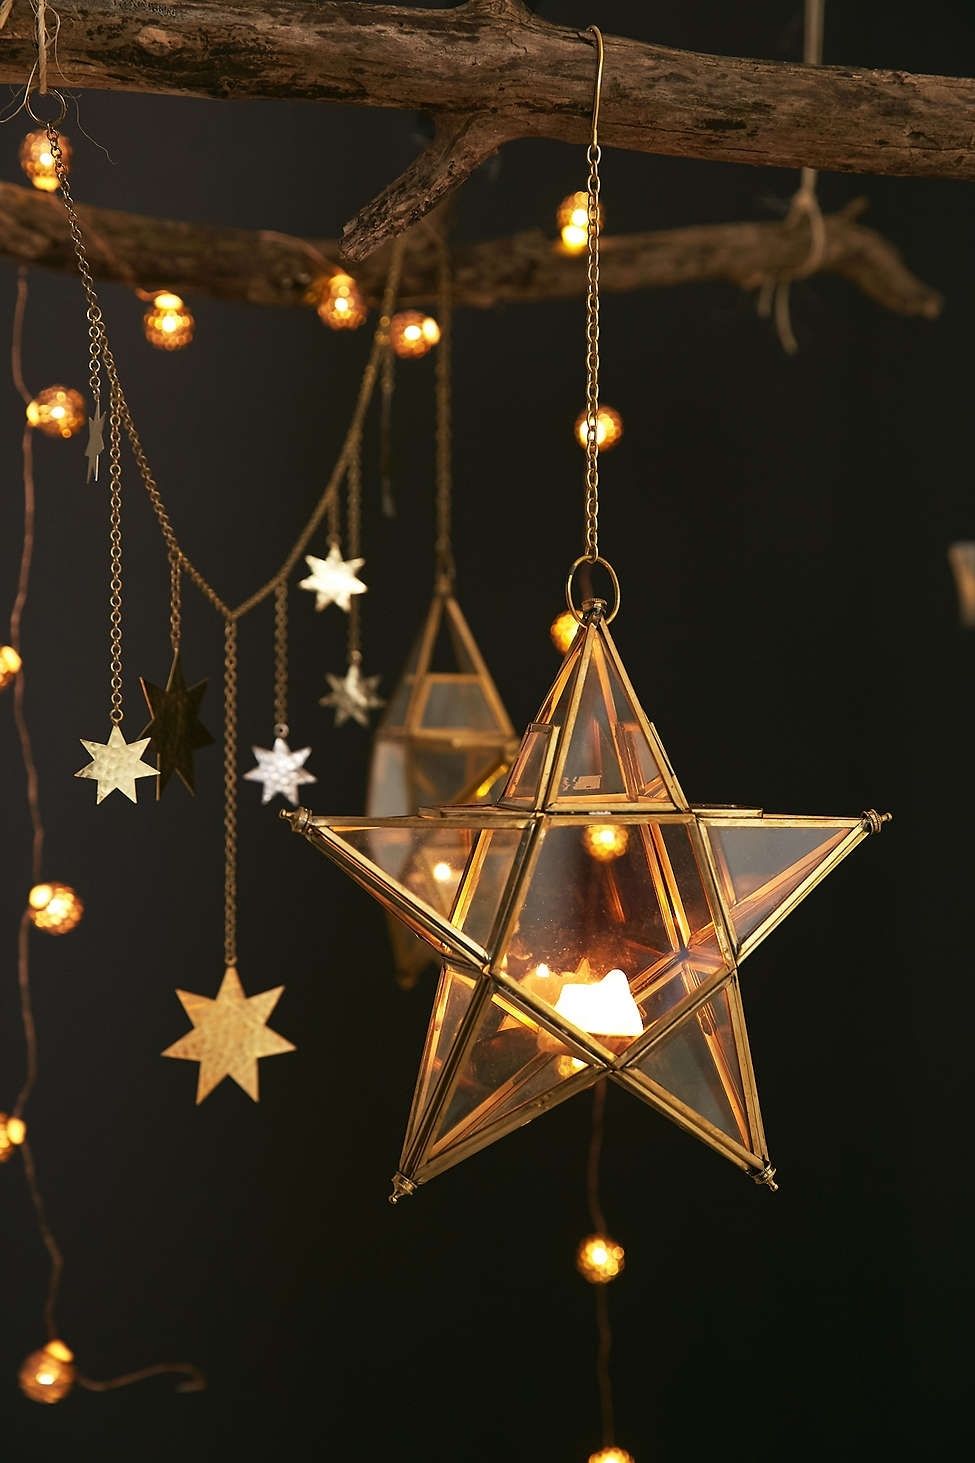 Hanging Star Terrarium | Decorating The Home We Don't Have Just Yet With Outdoor Hanging Star Lanterns (View 6 of 15)